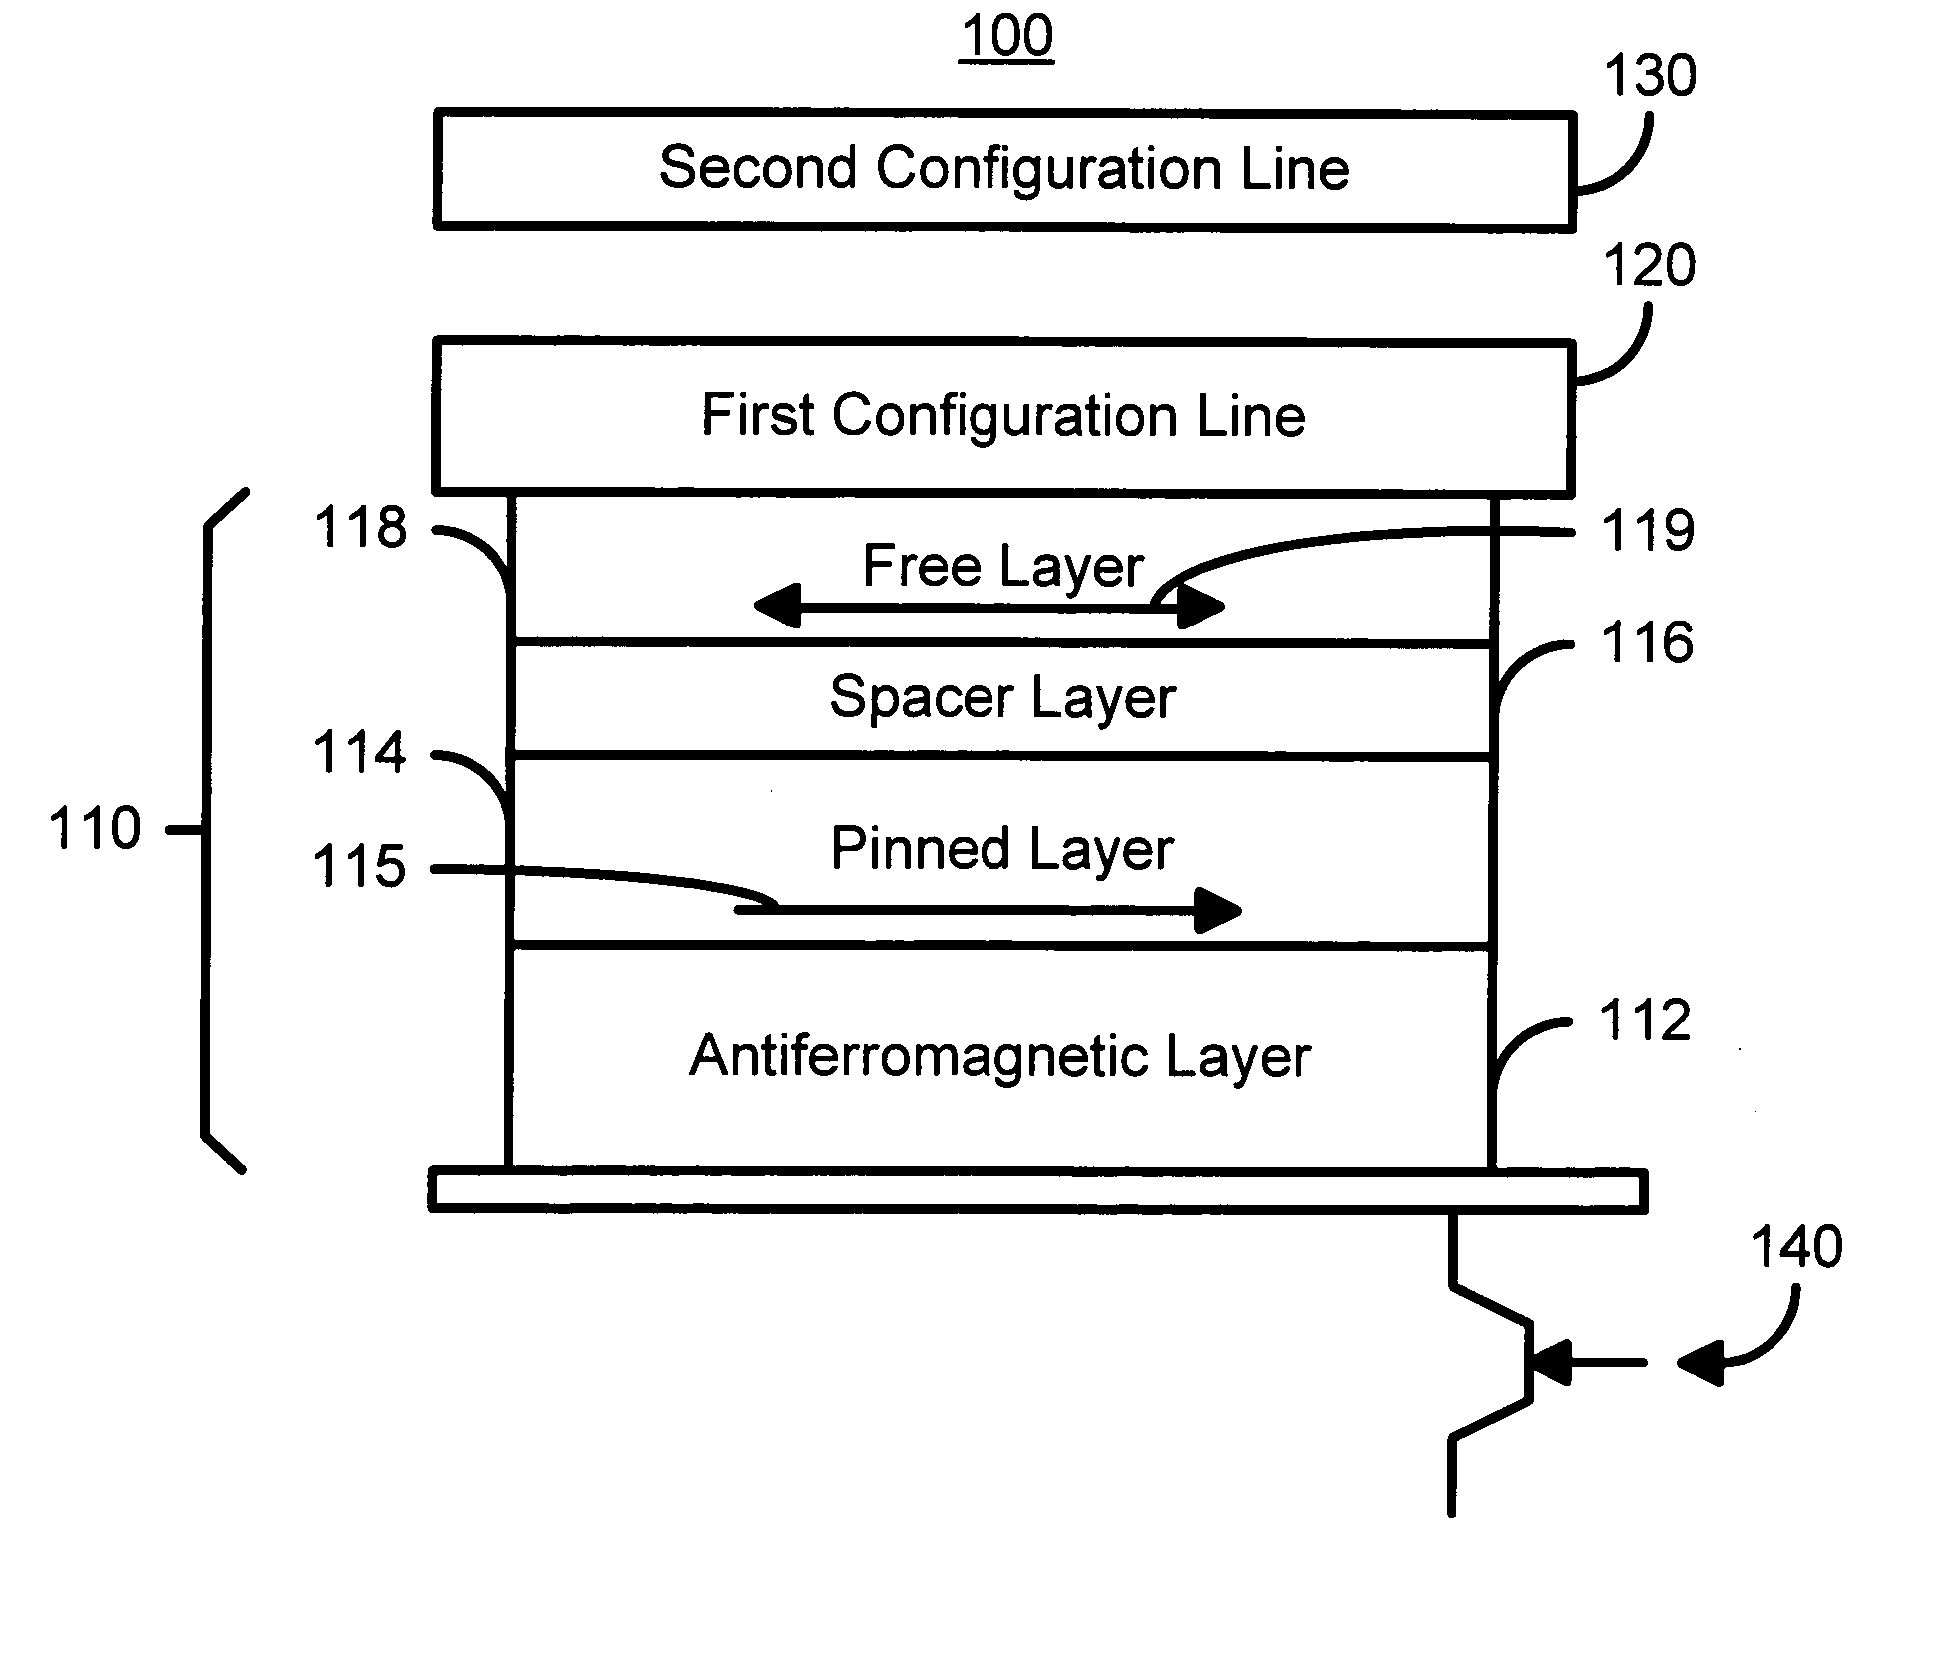 Re-configurable logic elements using heat assisted magnetic tunneling elements